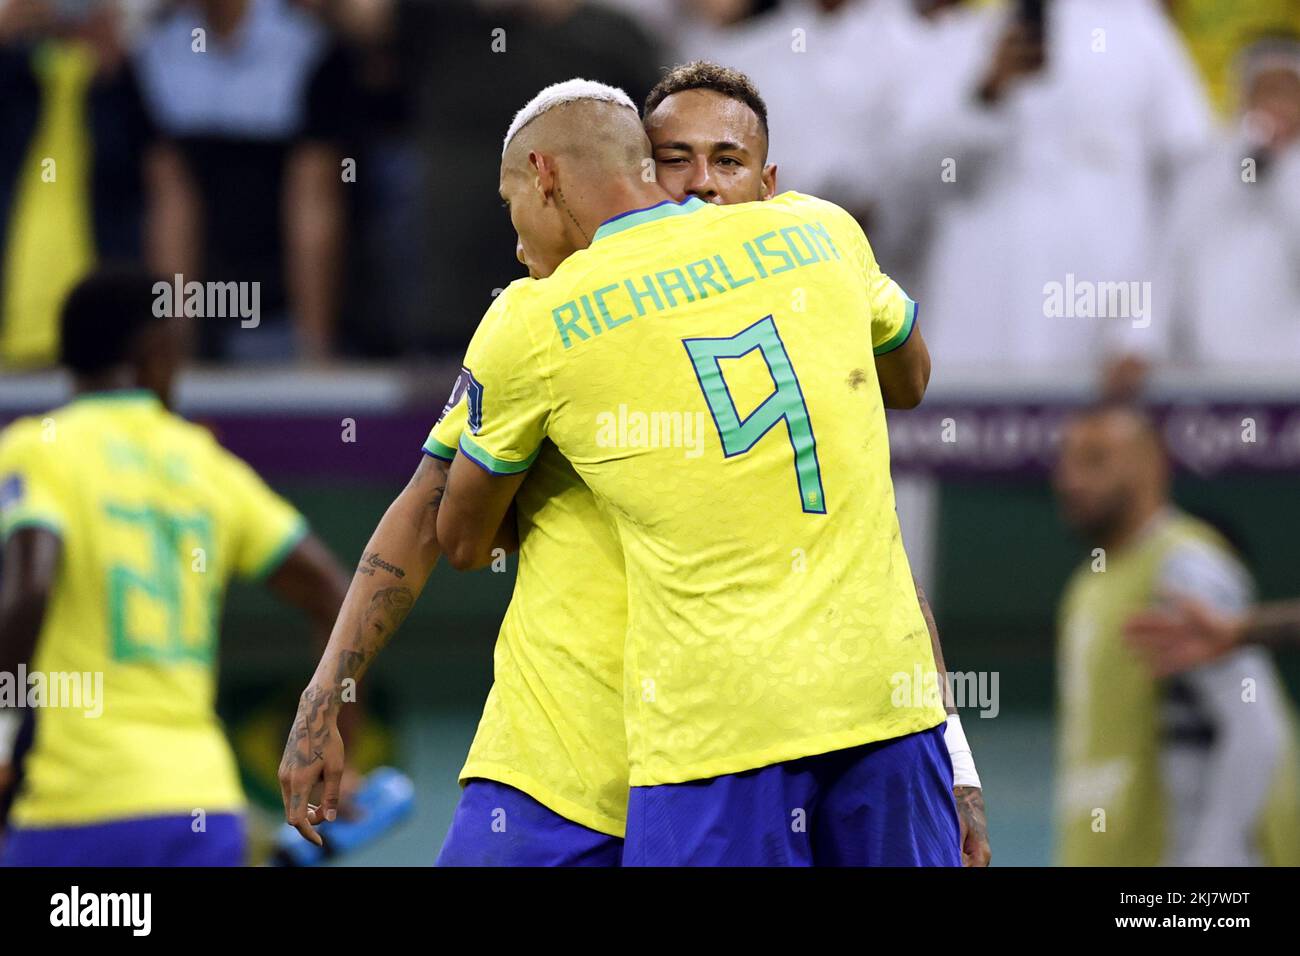 LUSAIL CITY - (l-r) Richarlison of Brazil, Neymar of Brazil celebrate the 1-0 during the FIFA World Cup Qatar 2022 group G match between Brazil and Serbia at Lusail Stadium on November 24, 2022 in Lusail City, Qatar. AP | Dutch Height | MAURICE OF STONE Credit: ANP/Alamy Live News Stock Photo